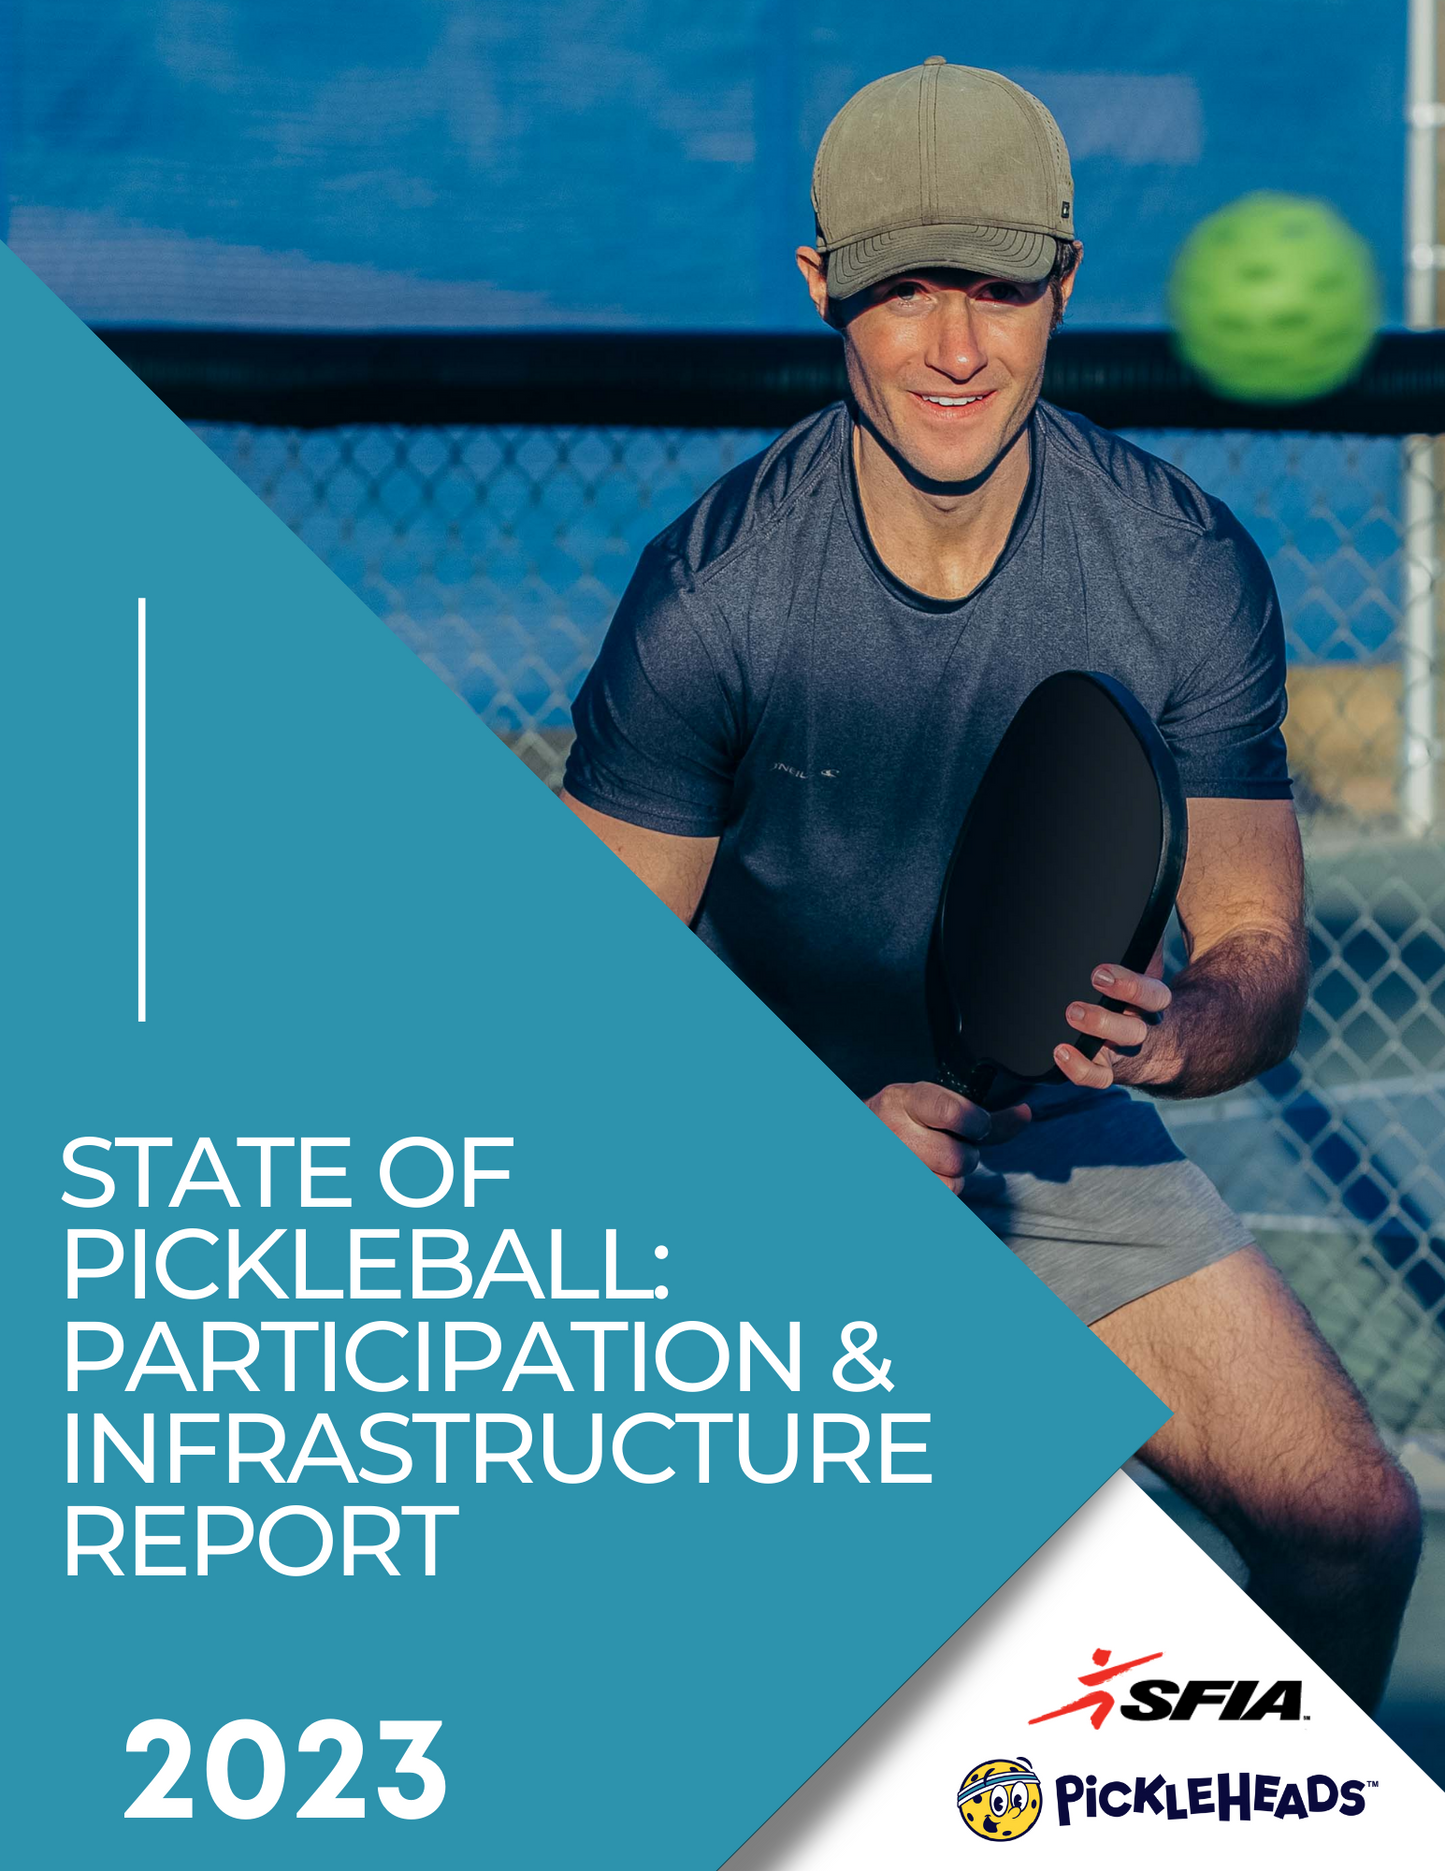 2023 State of Pickleball: Participation & Infrastructure Report